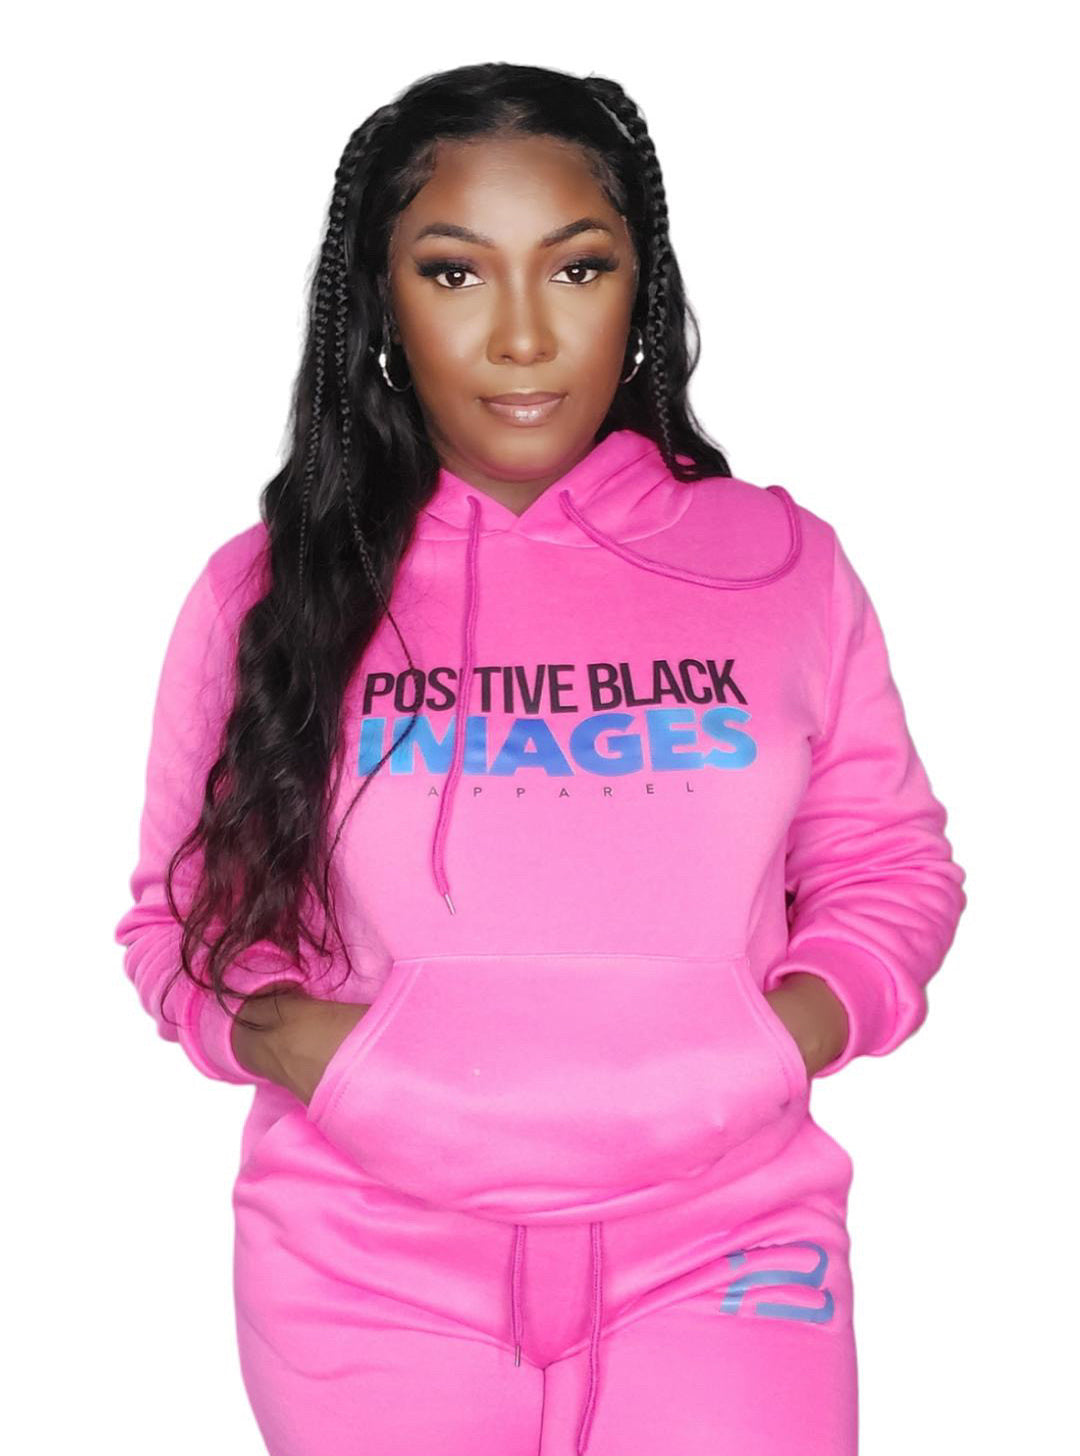 Perfectly Pink Hoodie Sweatsuit – Positive Black Images Apparel